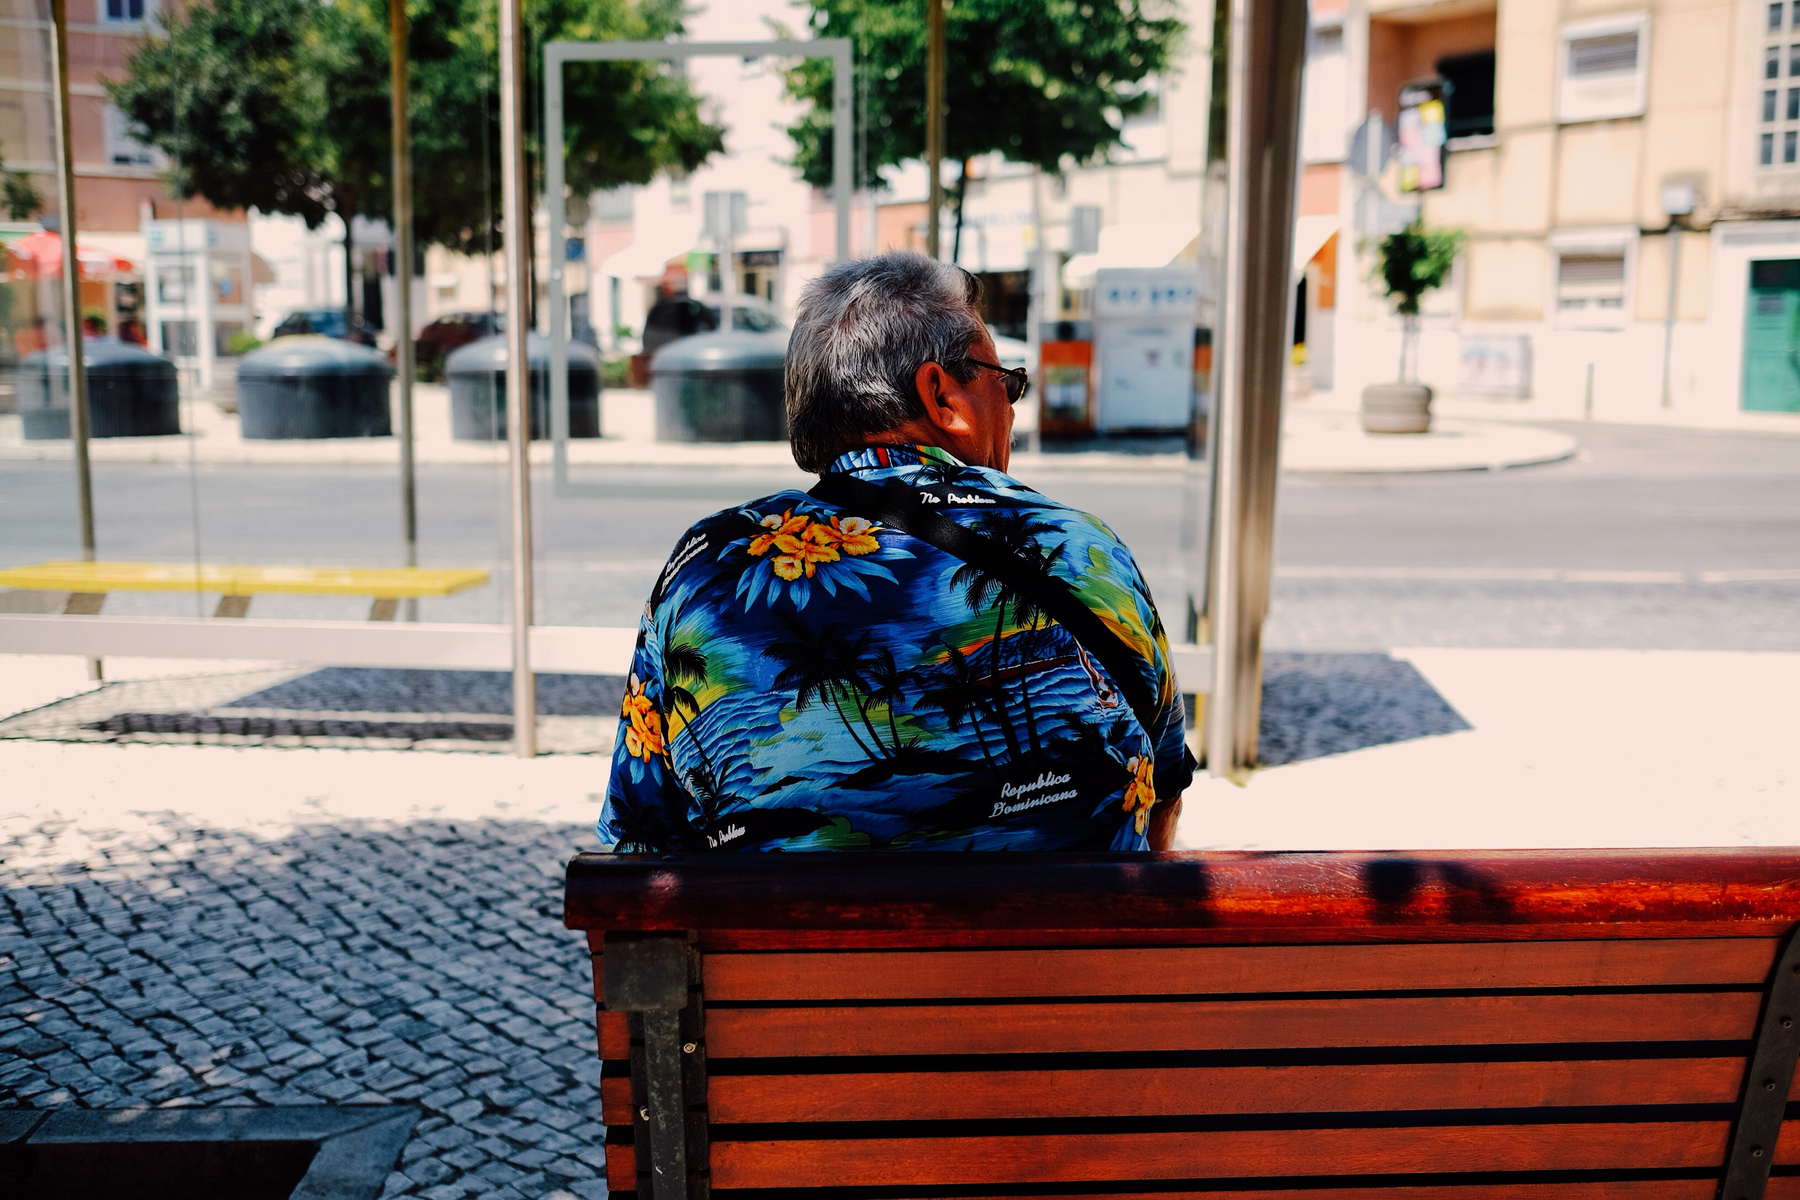 a man with a very colourful shirt sitting in a bench.